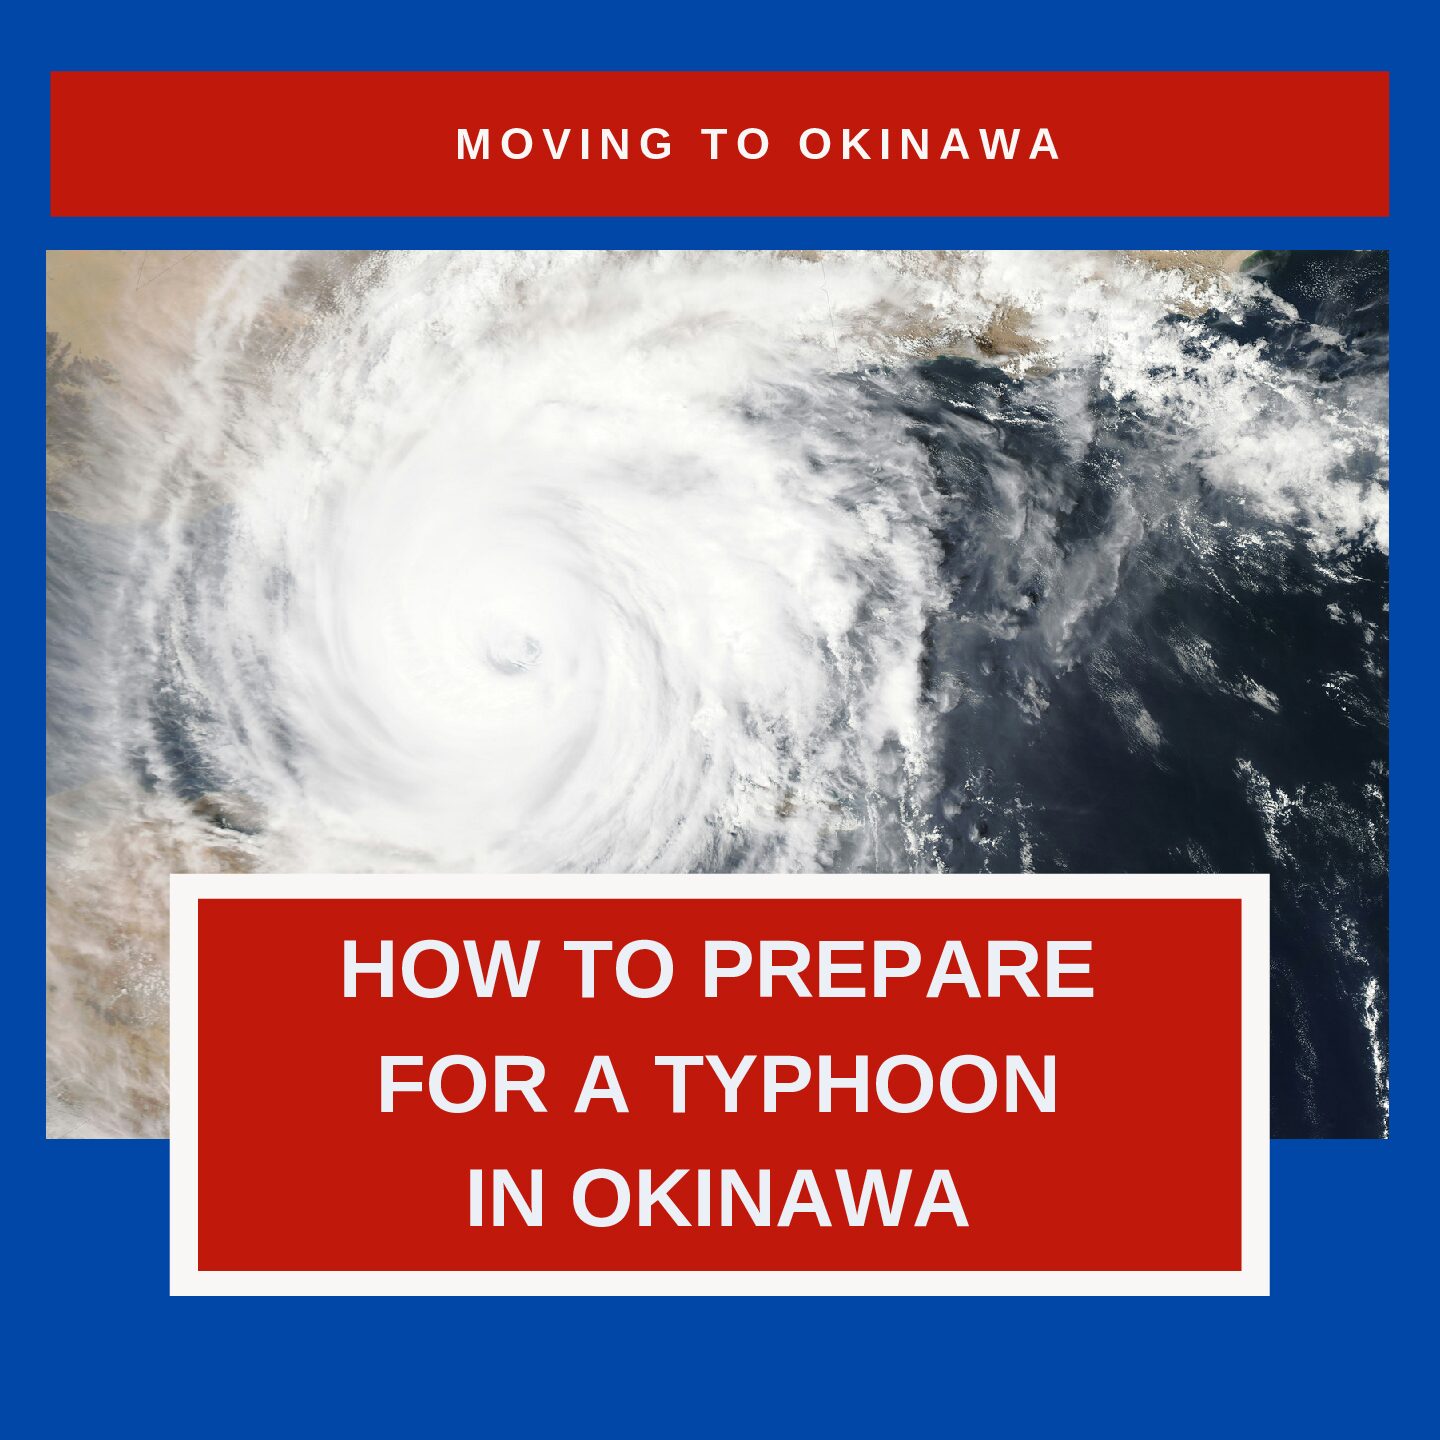 How To Prepare For a Typhoon